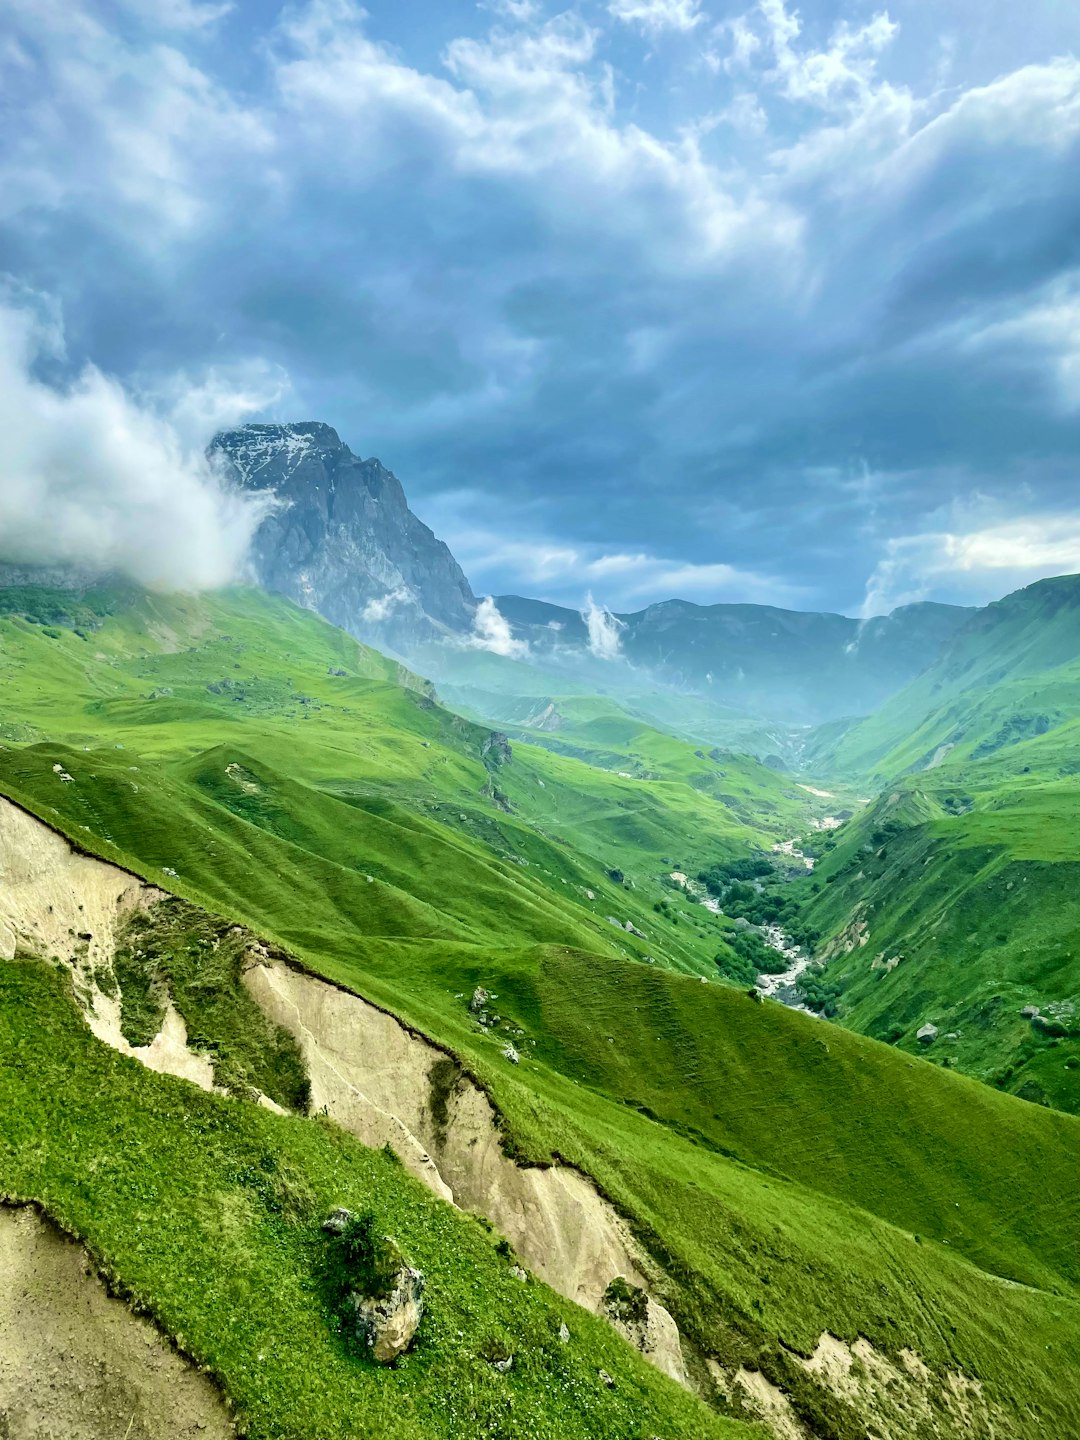 green grass covered mountain under cloudy sky during daytime